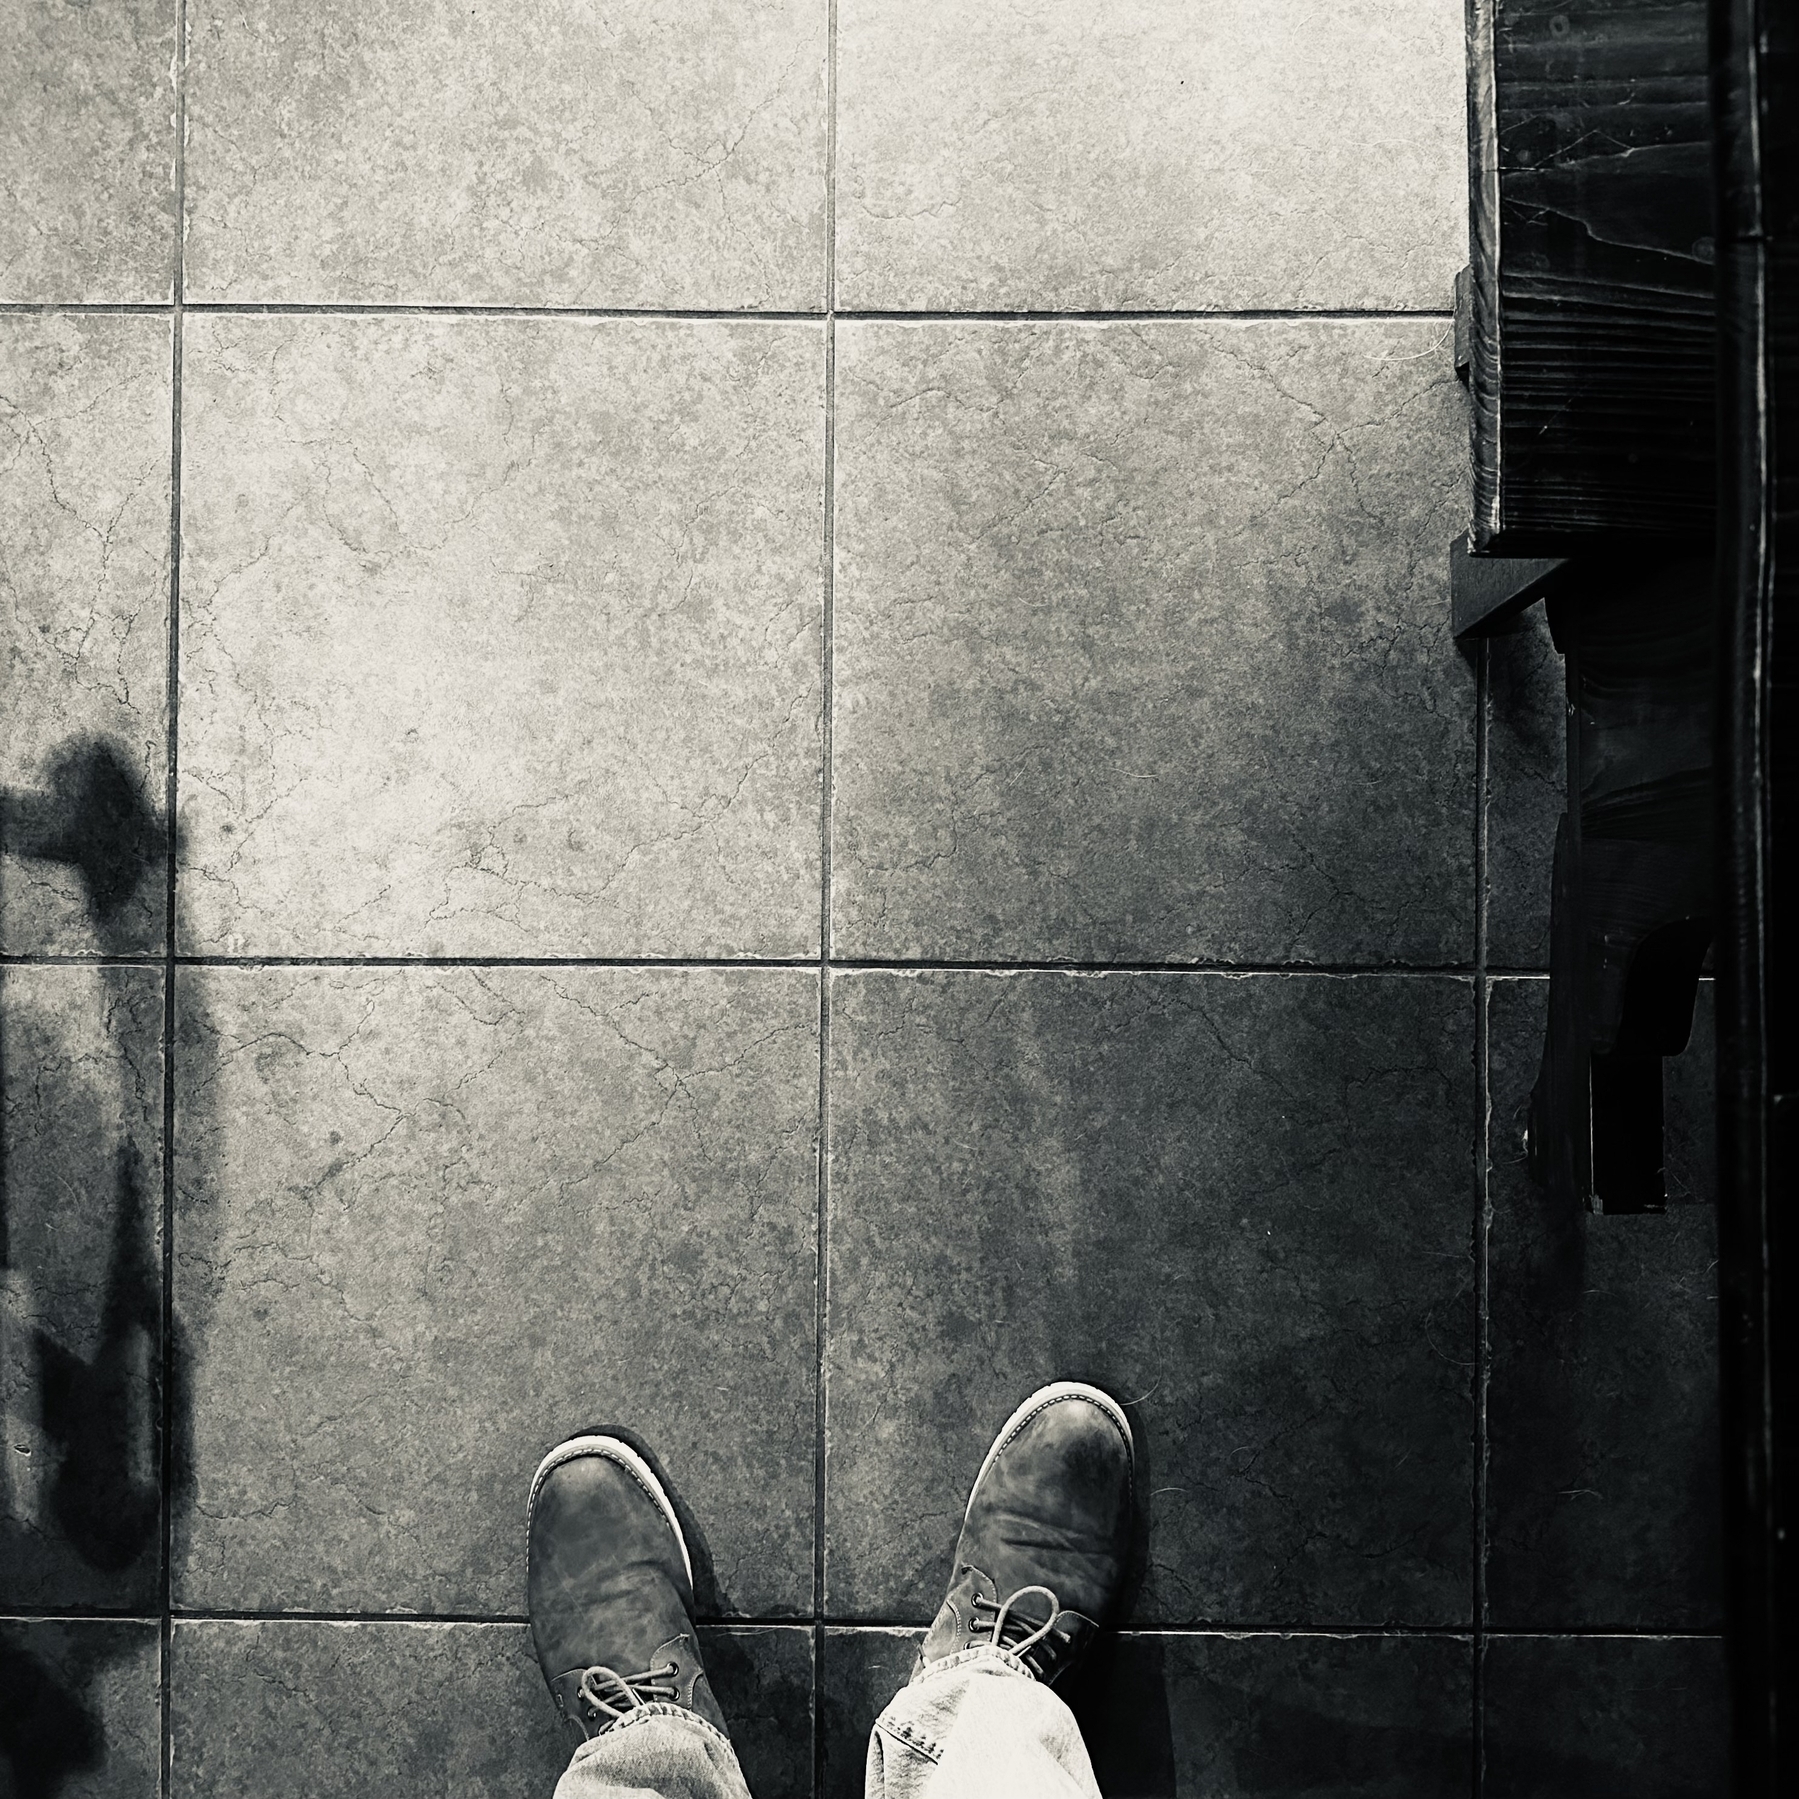 Looking down at the tile floor with shoes visible.